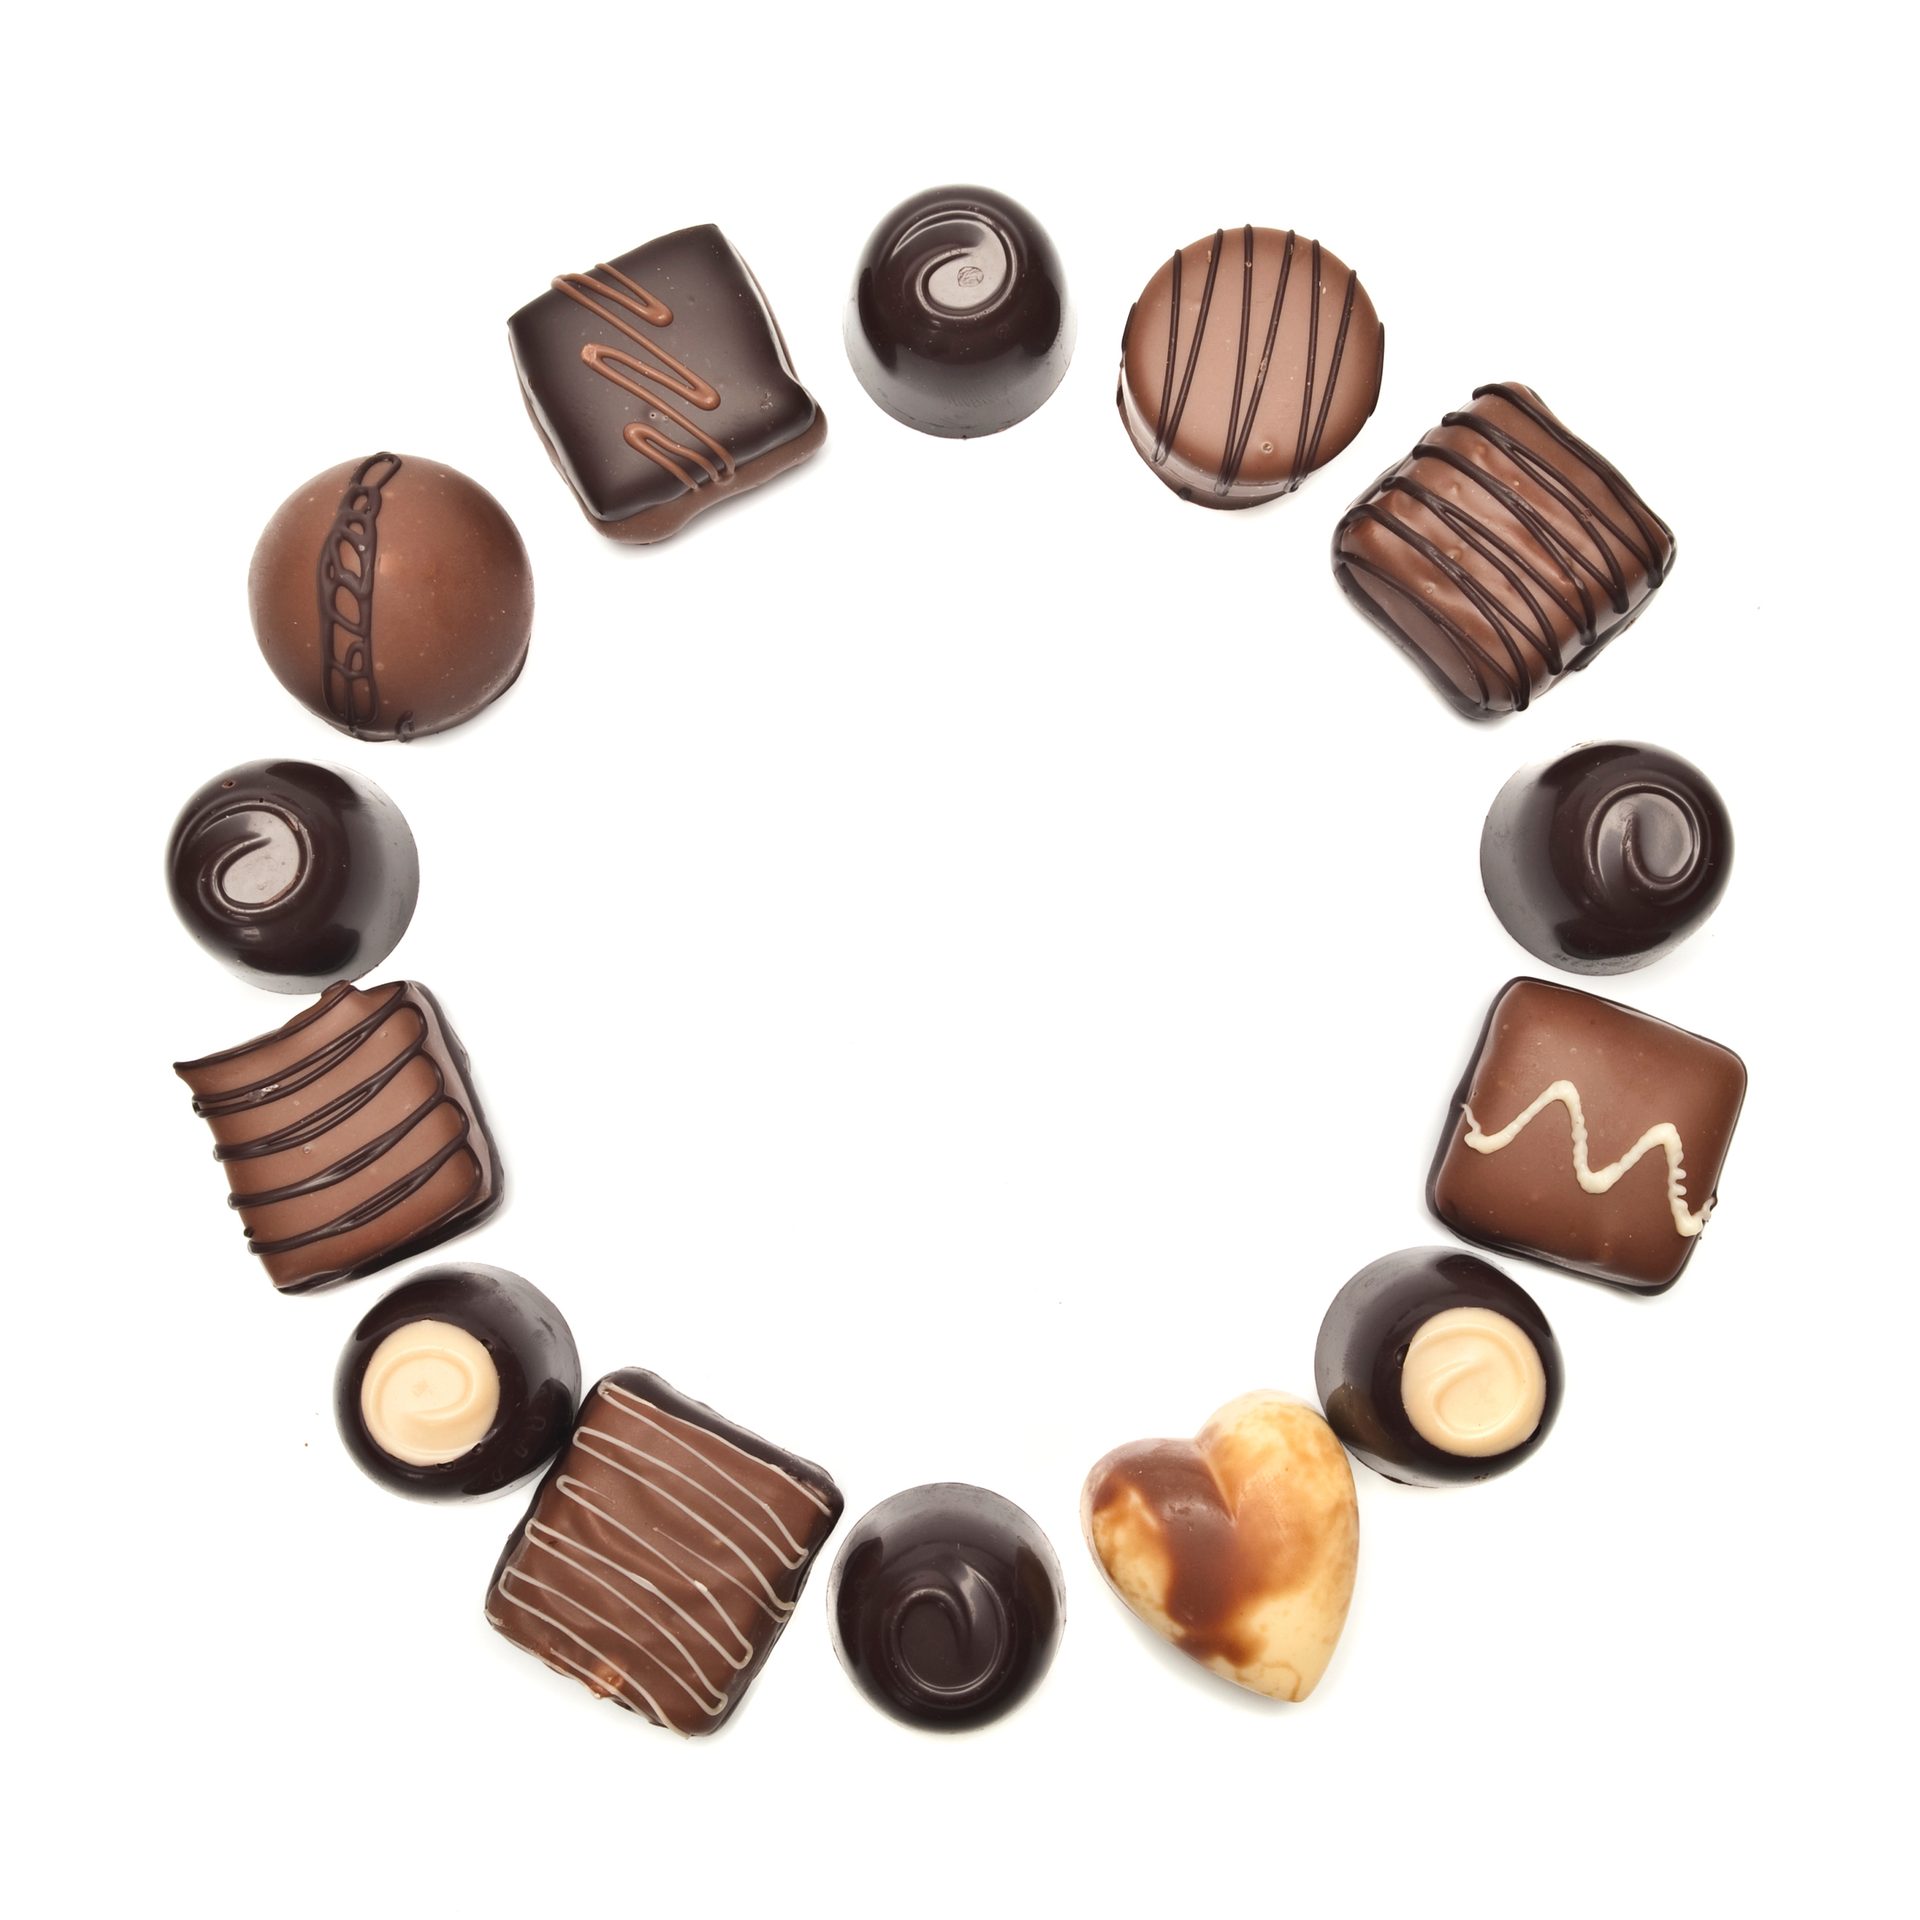 Brown, Amber, Chocolates arranged in a circle